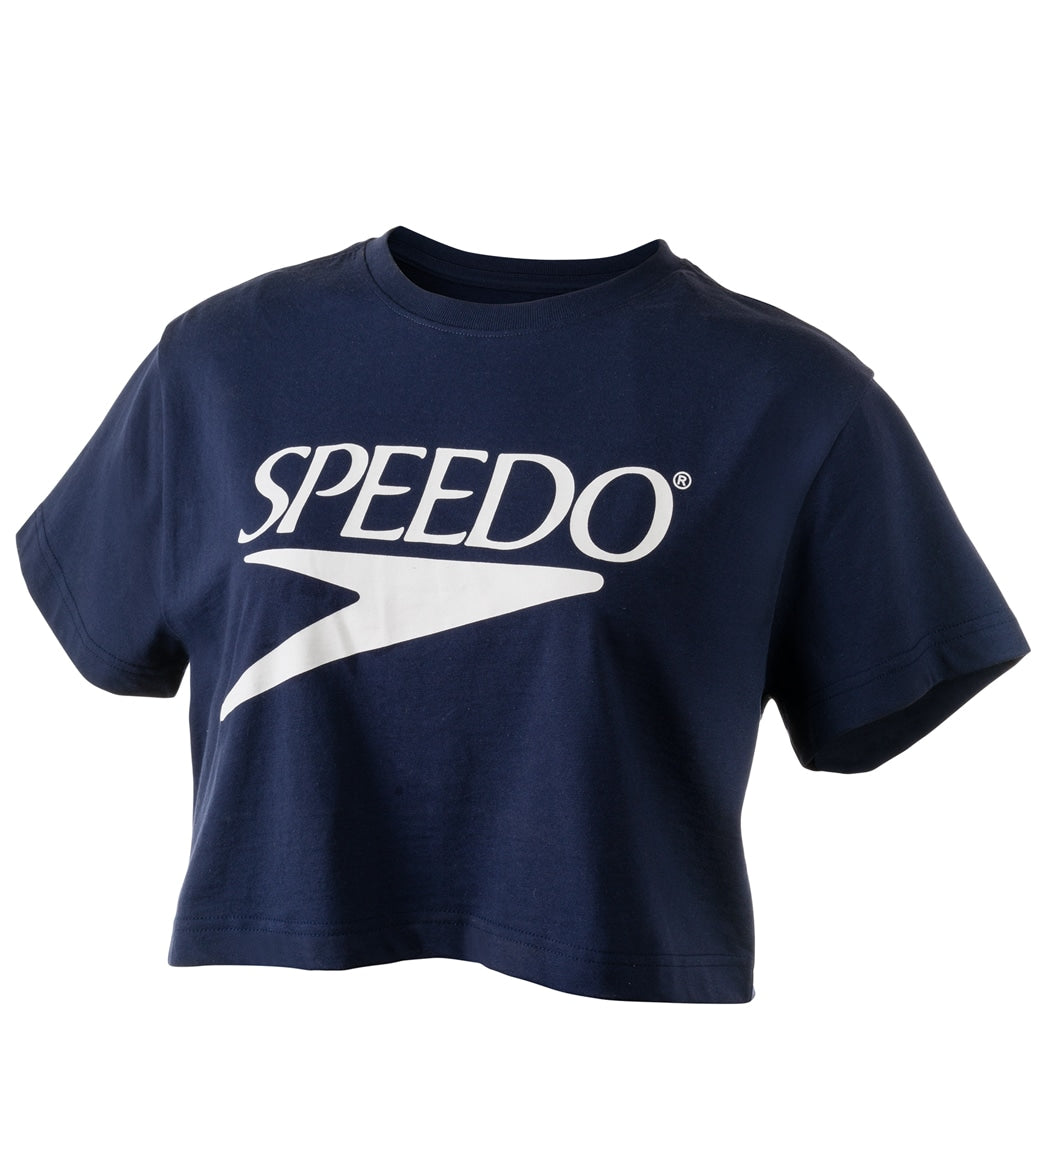 Speedo Women's Vintage Cropped Tee Shirt - Navy Large Size Large - Swimoutlet.com